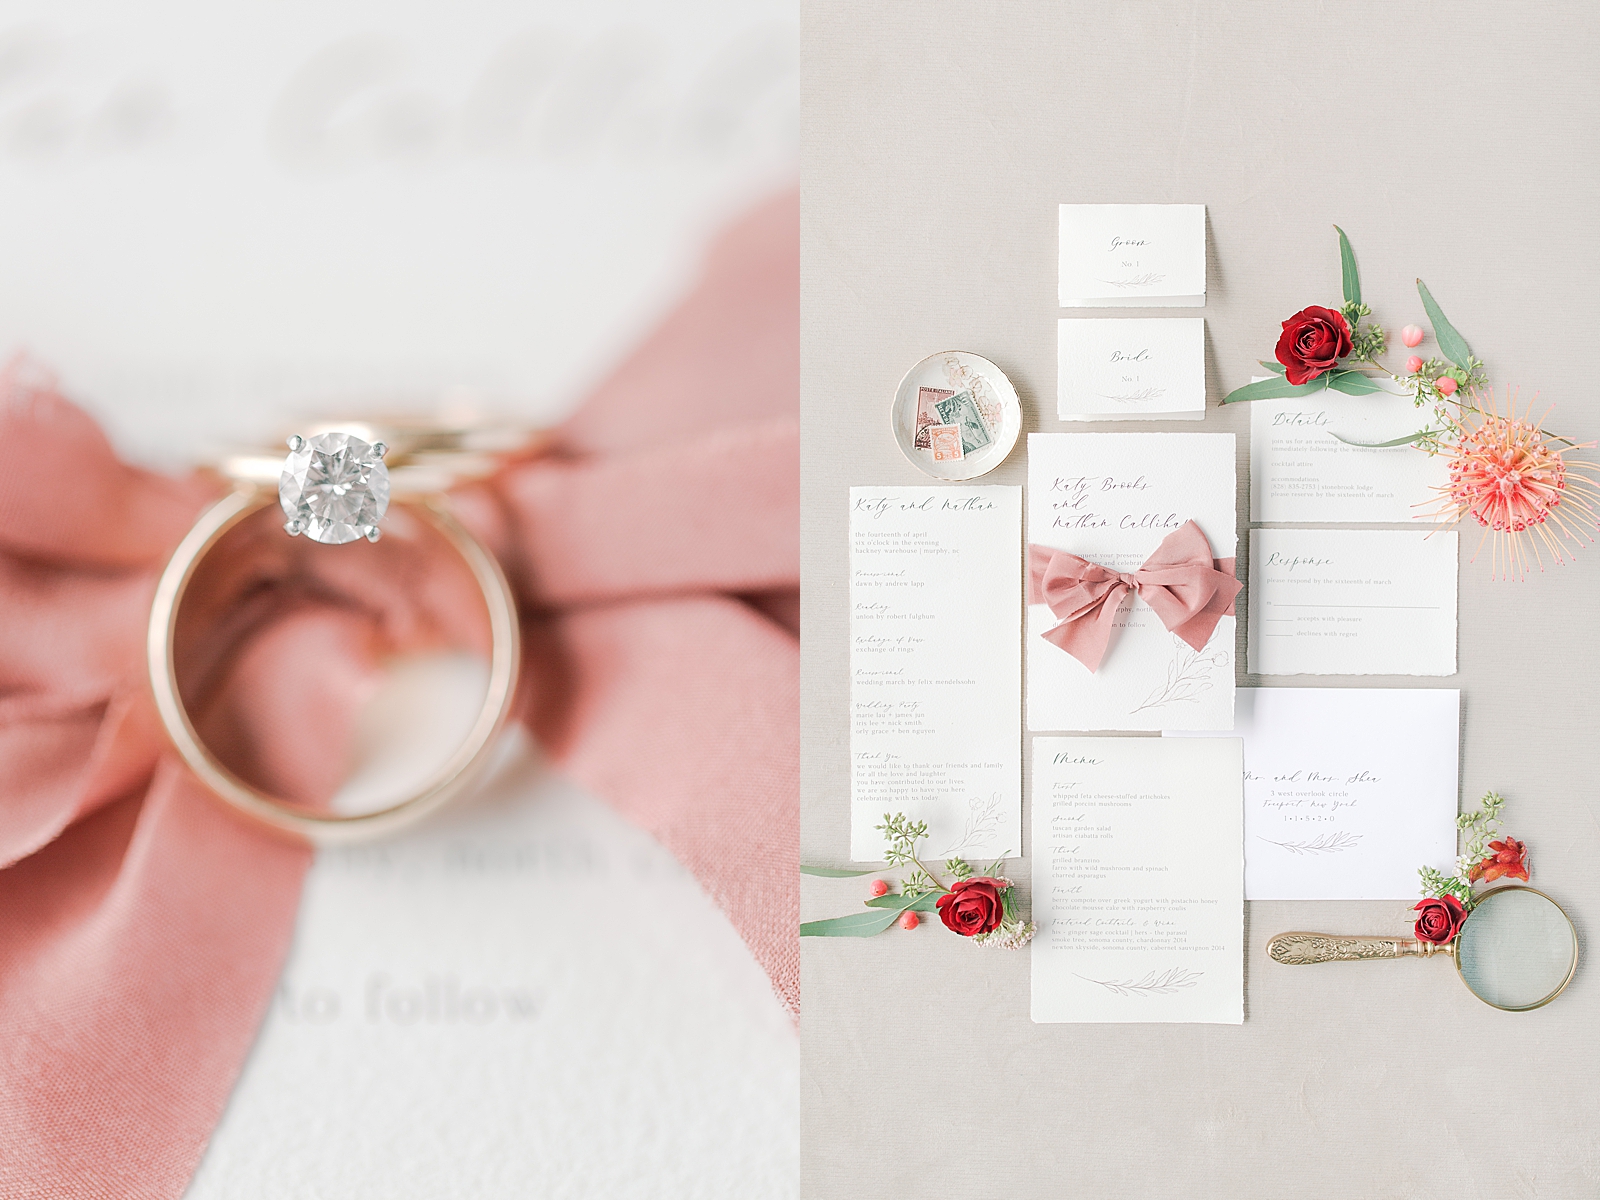 Hackney Warehouse Wedding Detail of Rings and Invitation Suite Photos